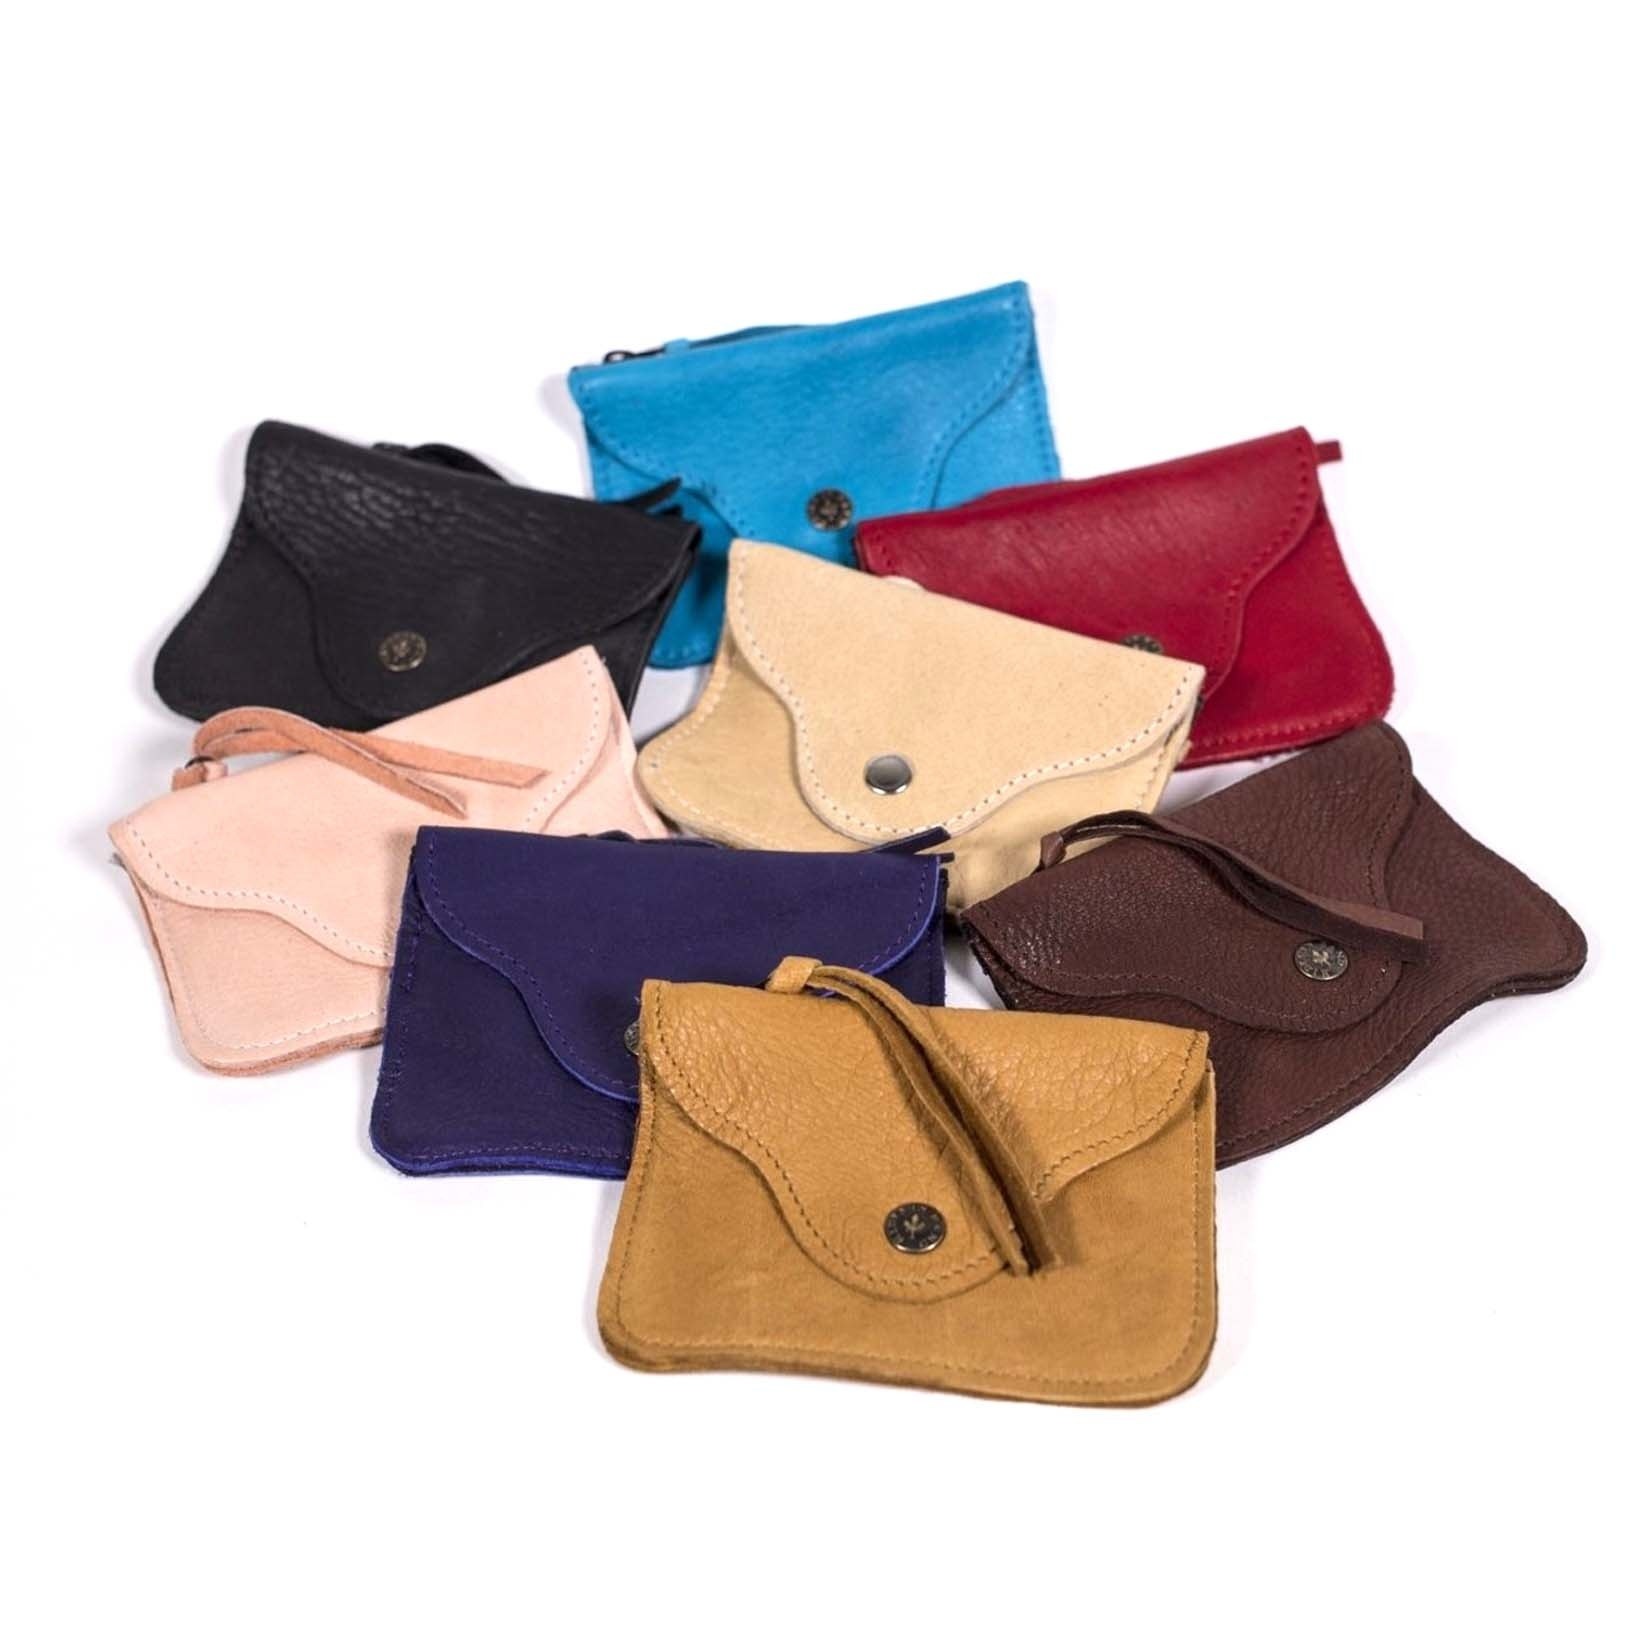 Hides in Hand Coin Purses with Zipper & Snap